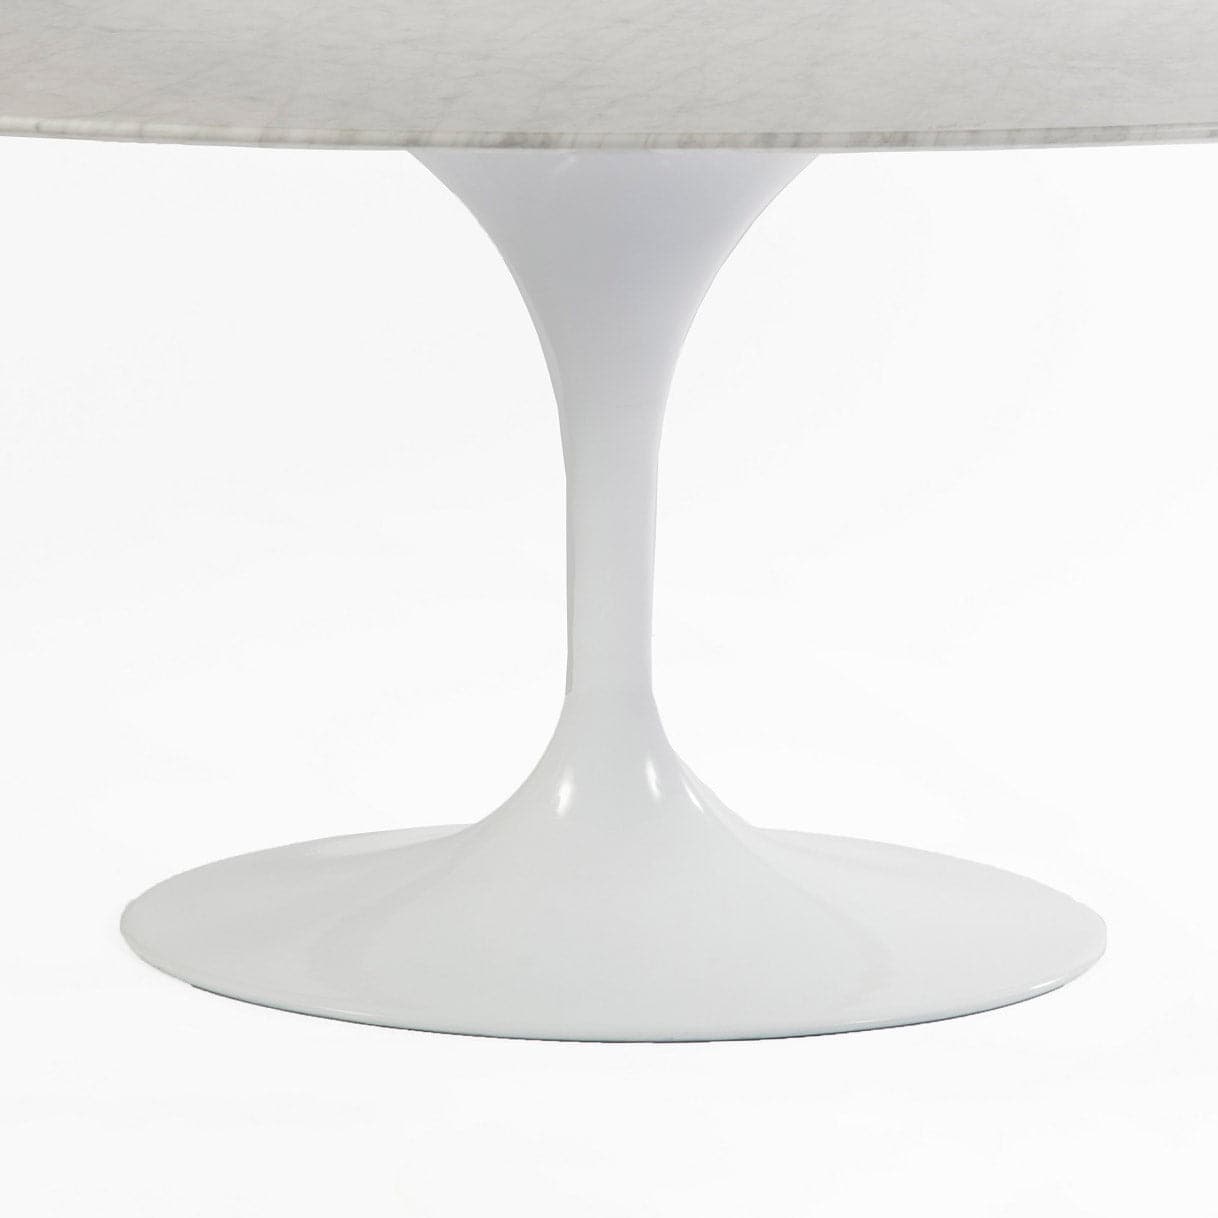 Carrara Marble Pedestal Tulip Dining Table Inspired by Eero 